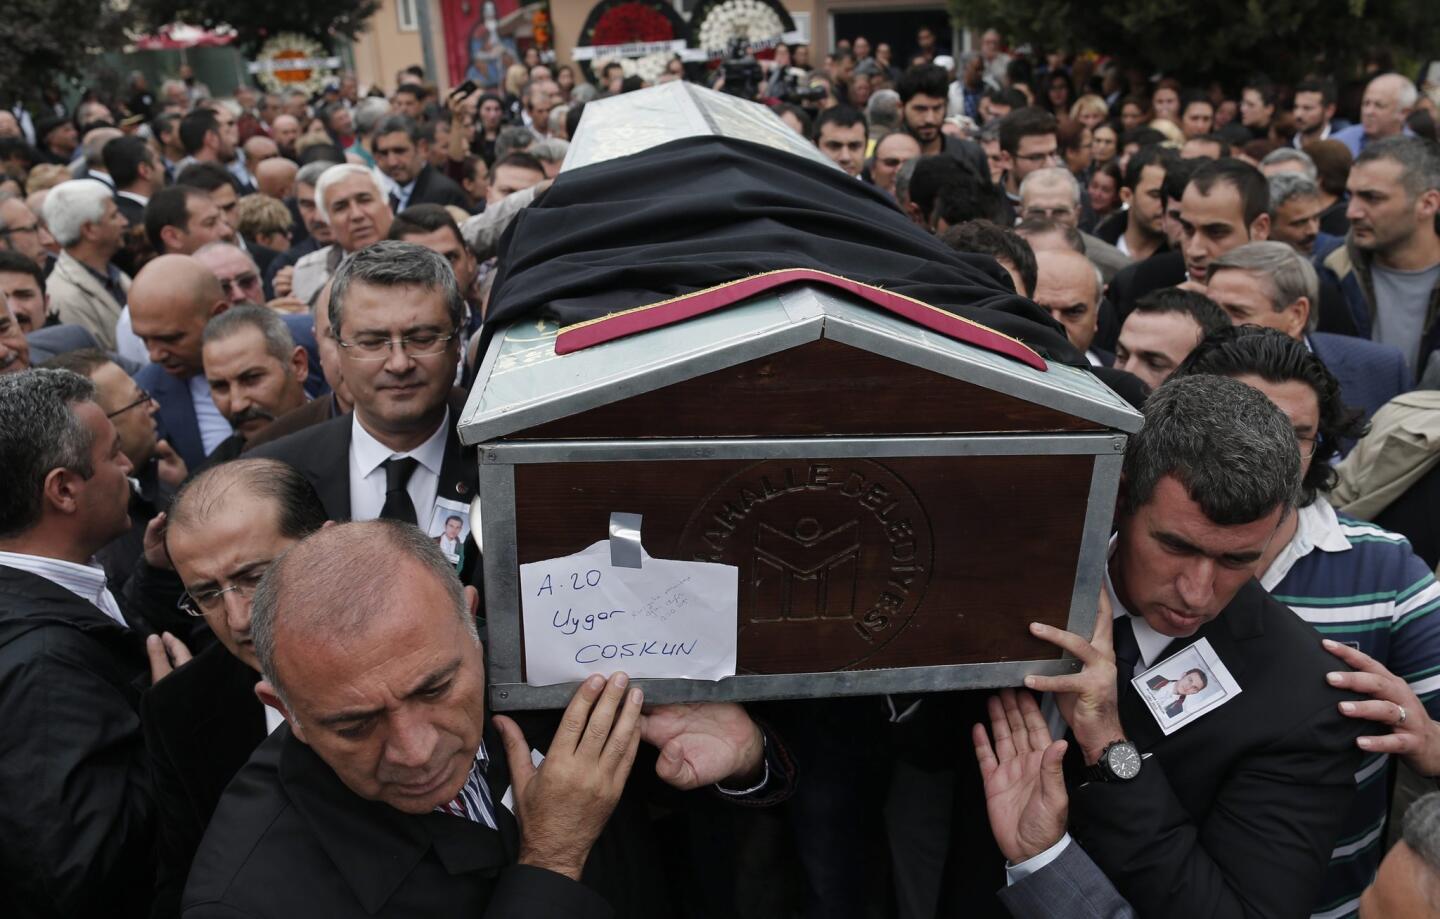 People carry coffin of the Uygar Coskun, who was killed the previous day in a twin blast in Ankara, during a funeral ceremony in Ankara, Turkey.